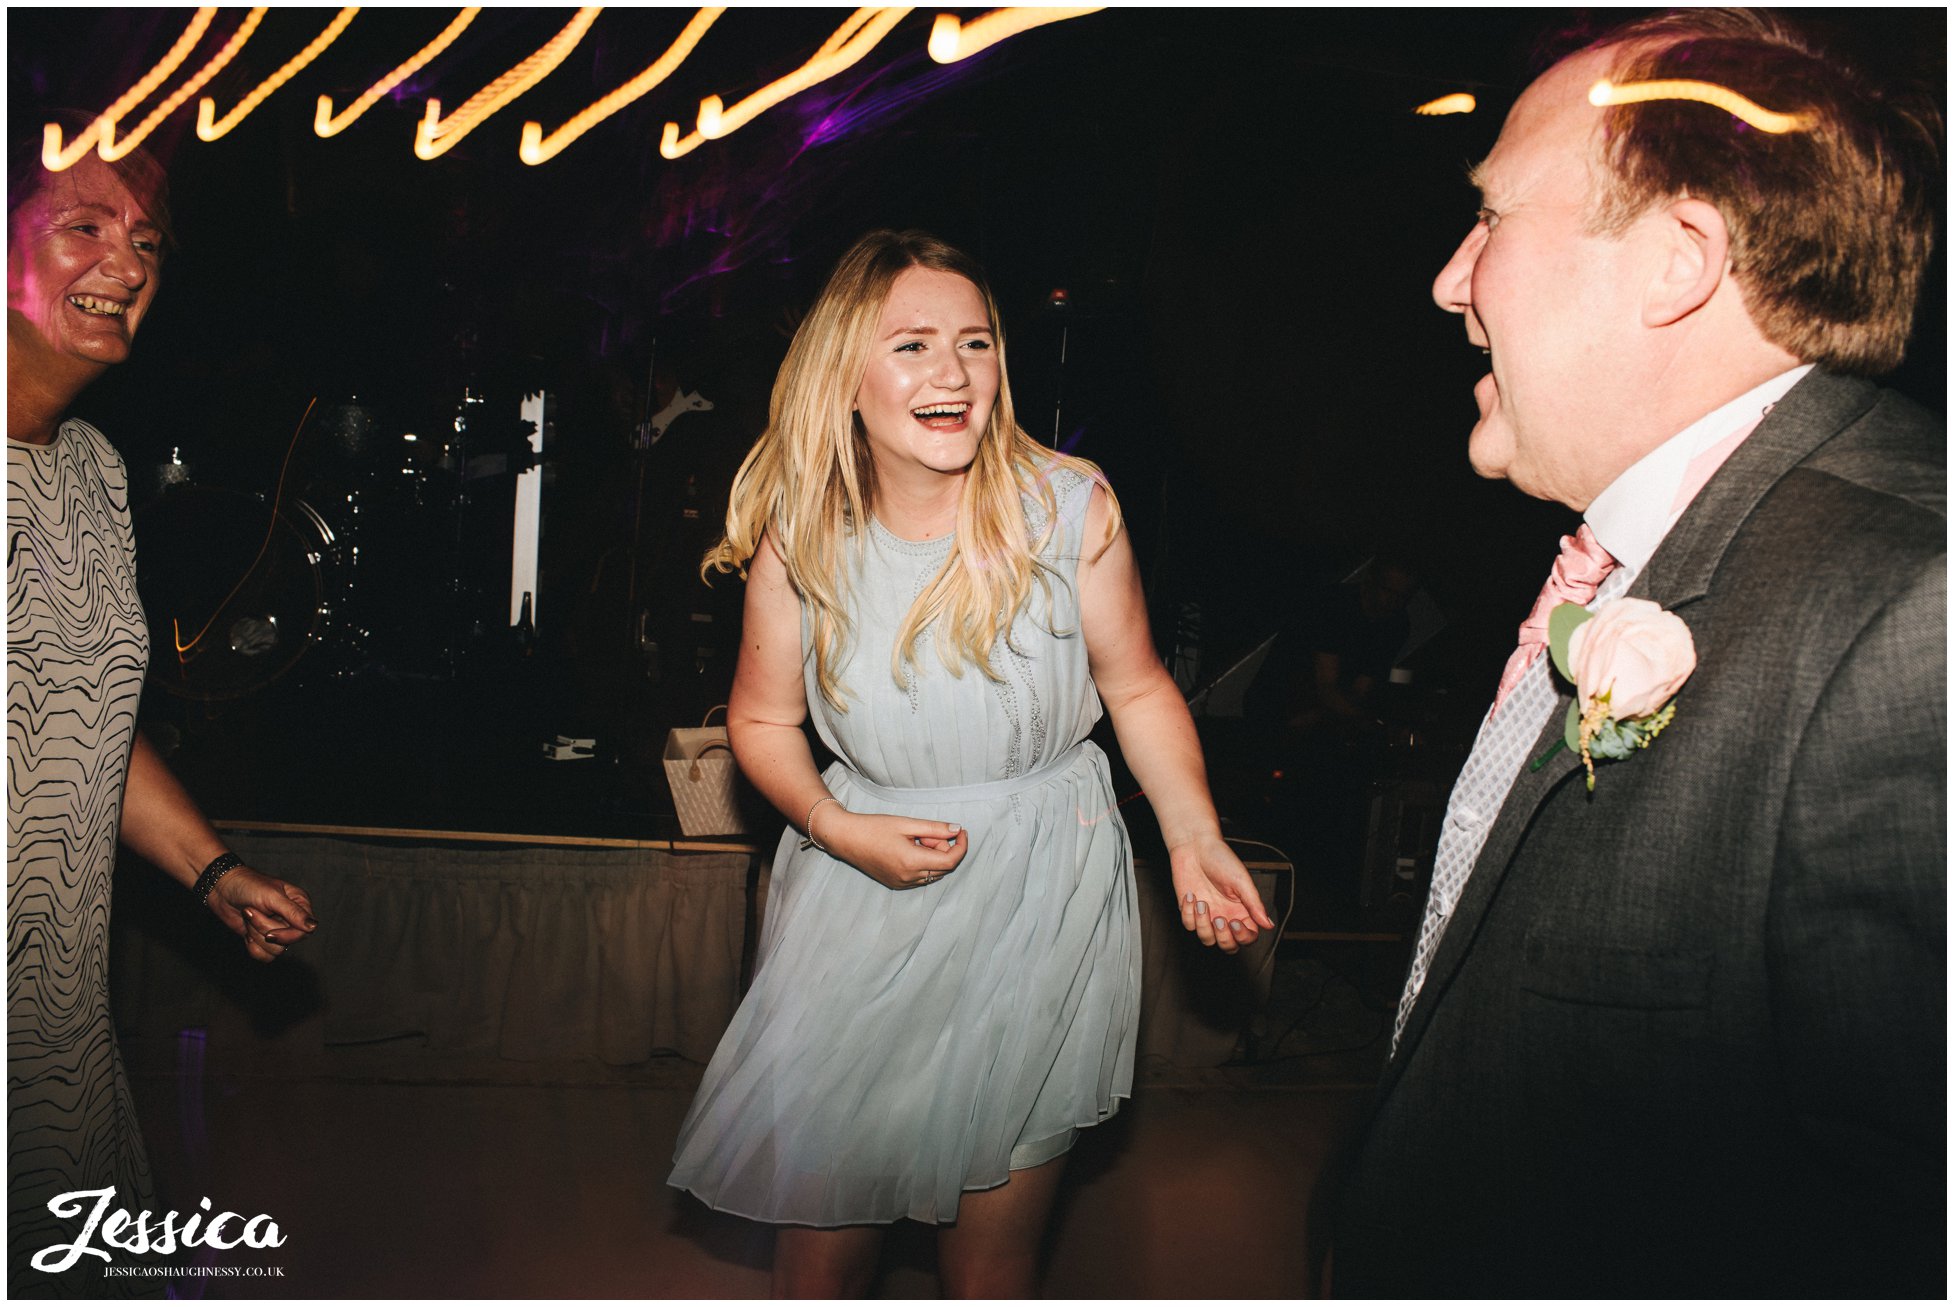 guests laughing on the dancefloor of wedding venue